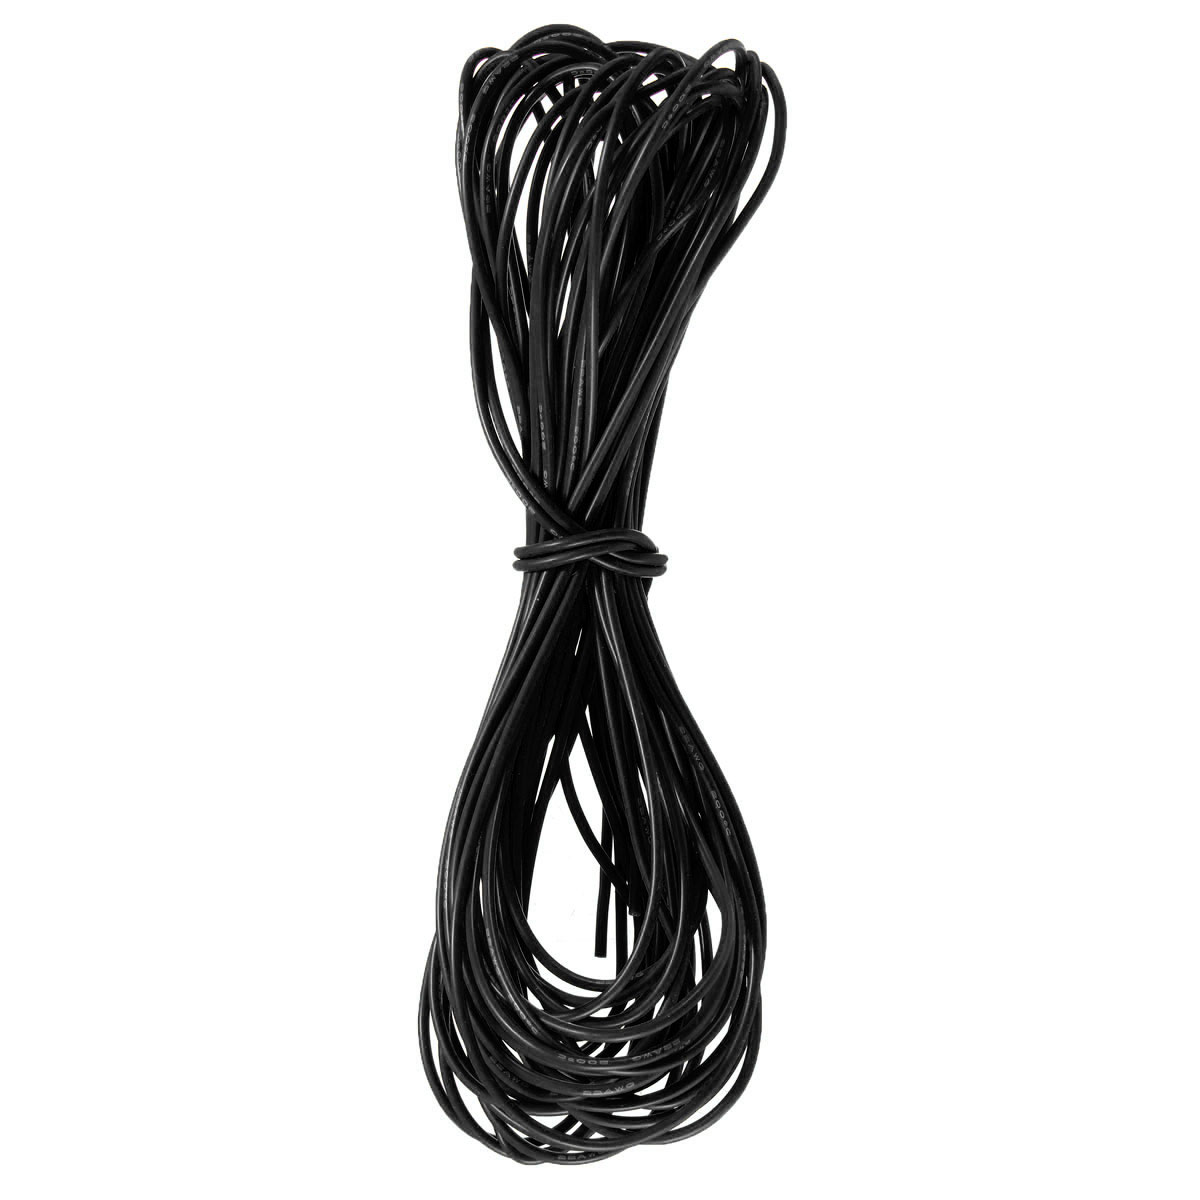 DANIU-10-Meter-Black-Silicone-Wire-Cable-10121416182022AWG-Flexible-Cable-1170303-5